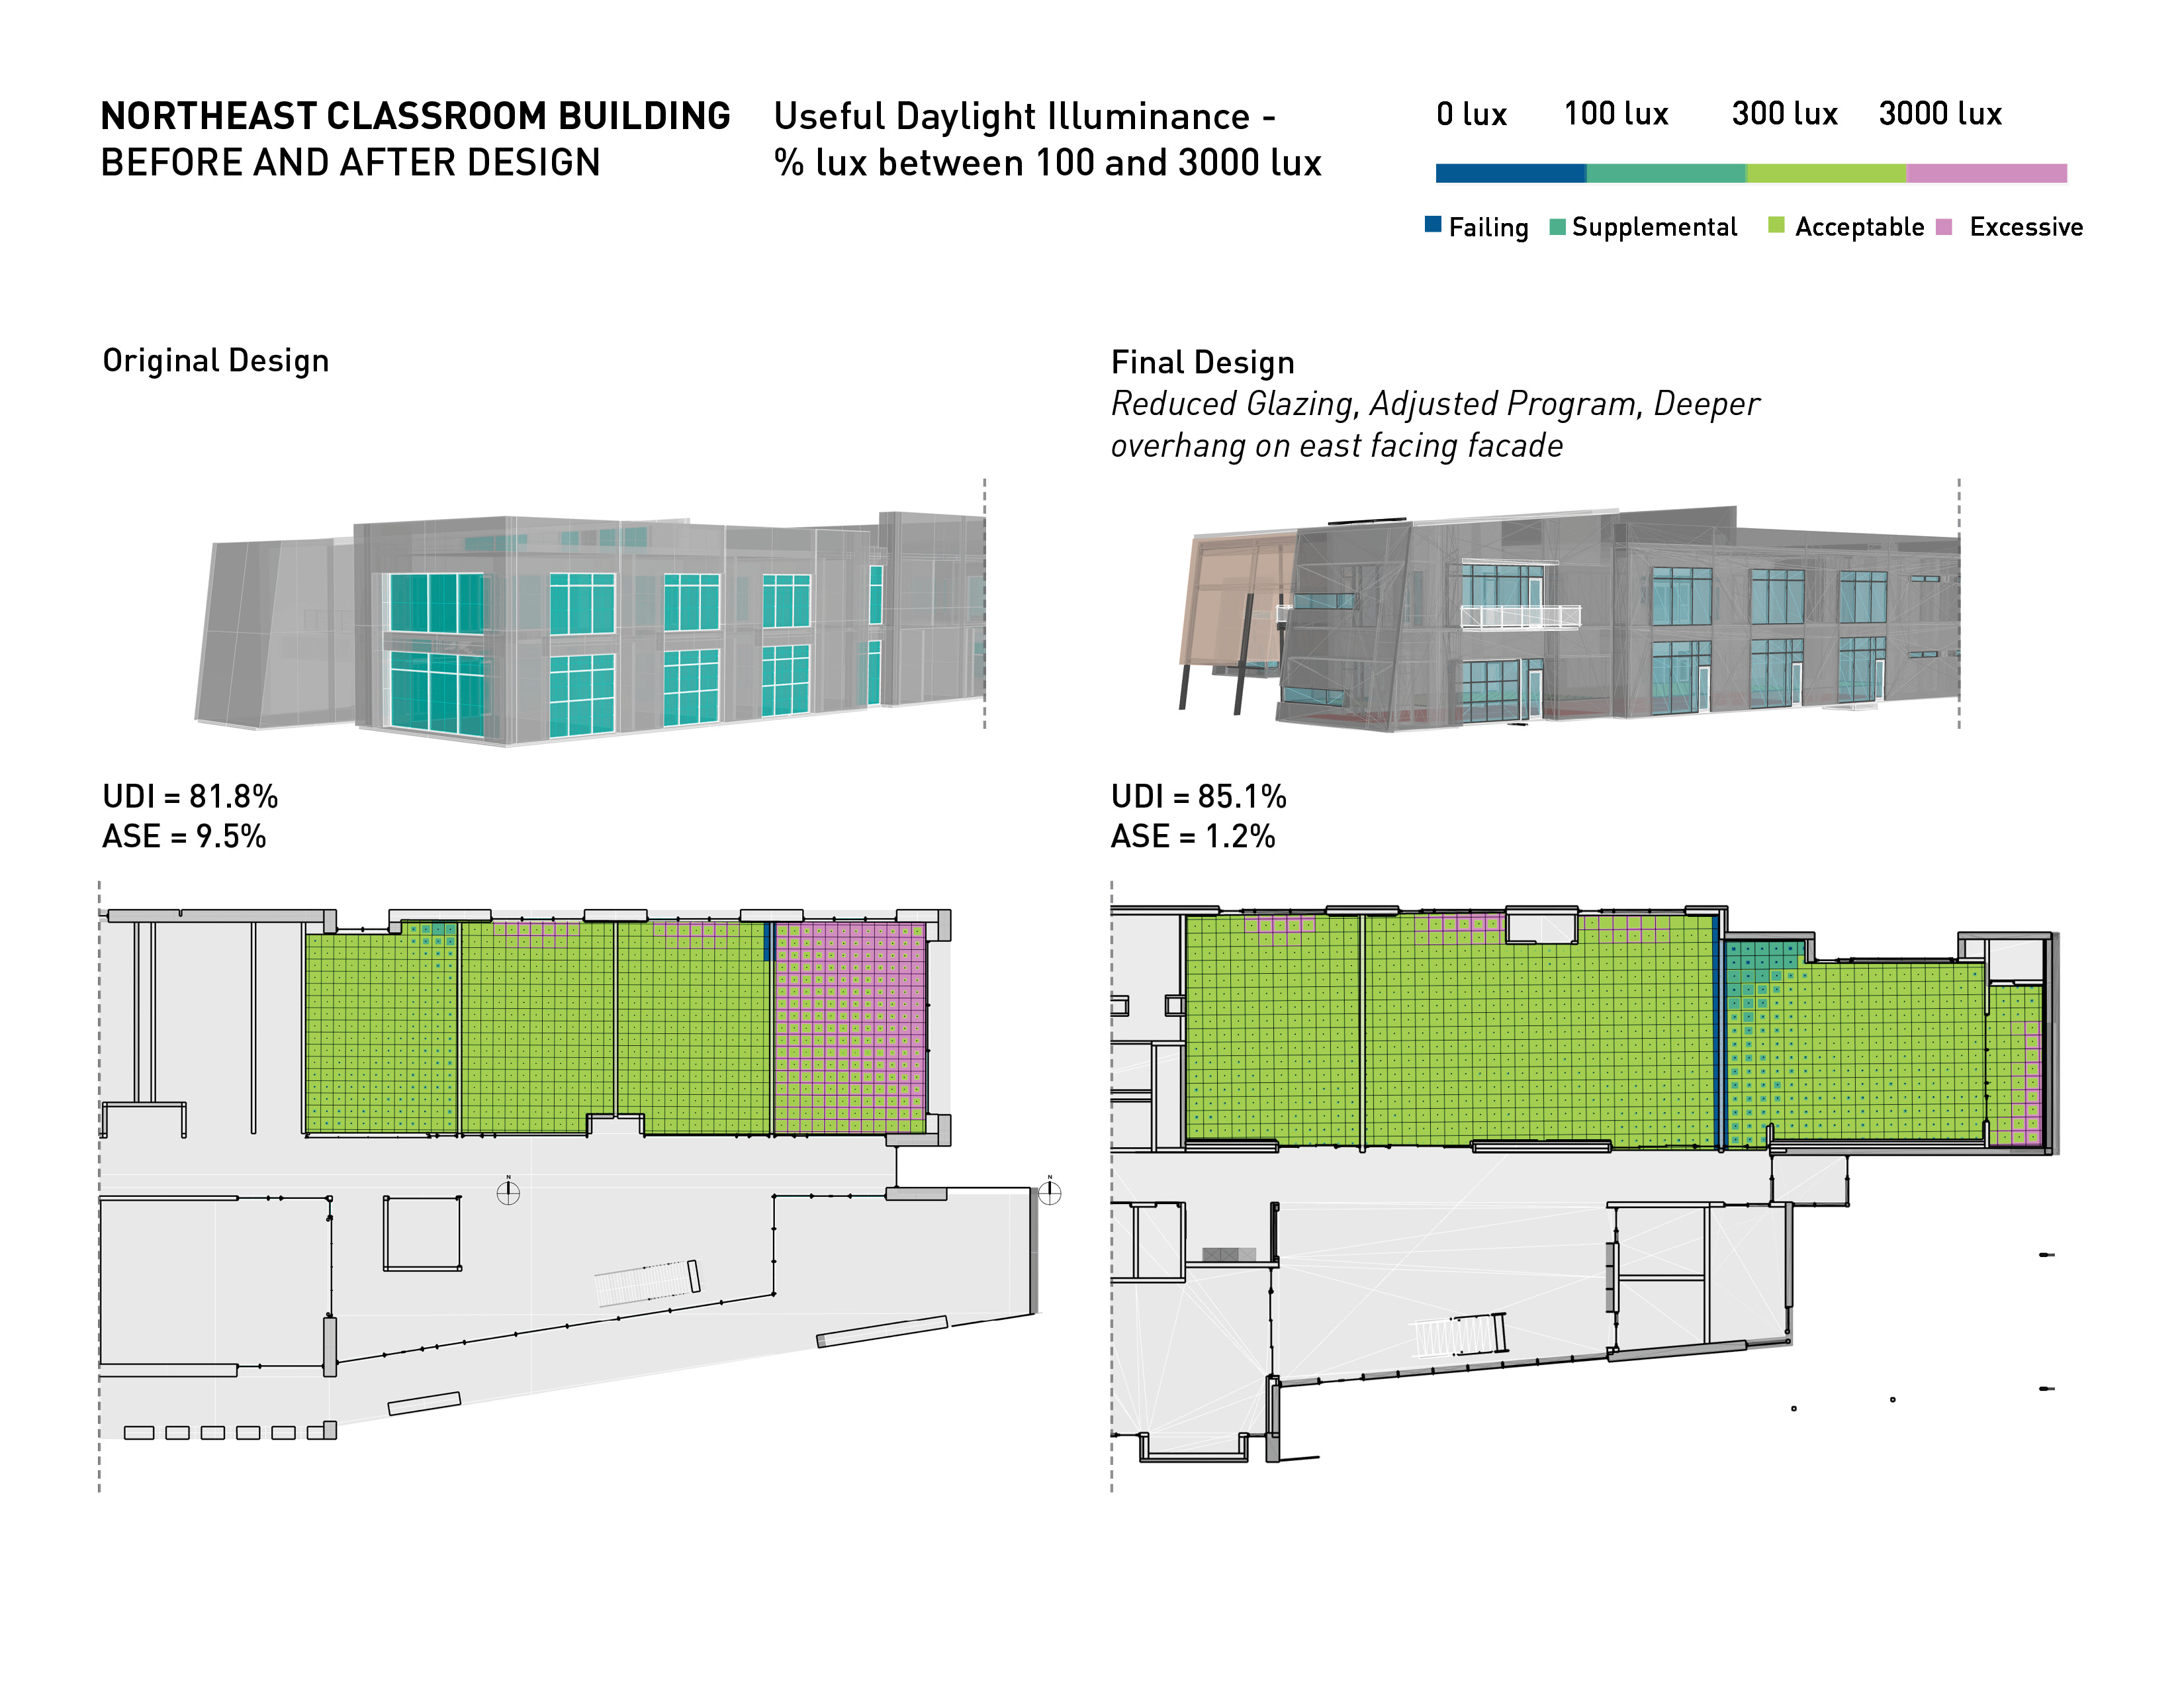 Before and after designs of the northeast classroom building at Alamogordo Middle School.